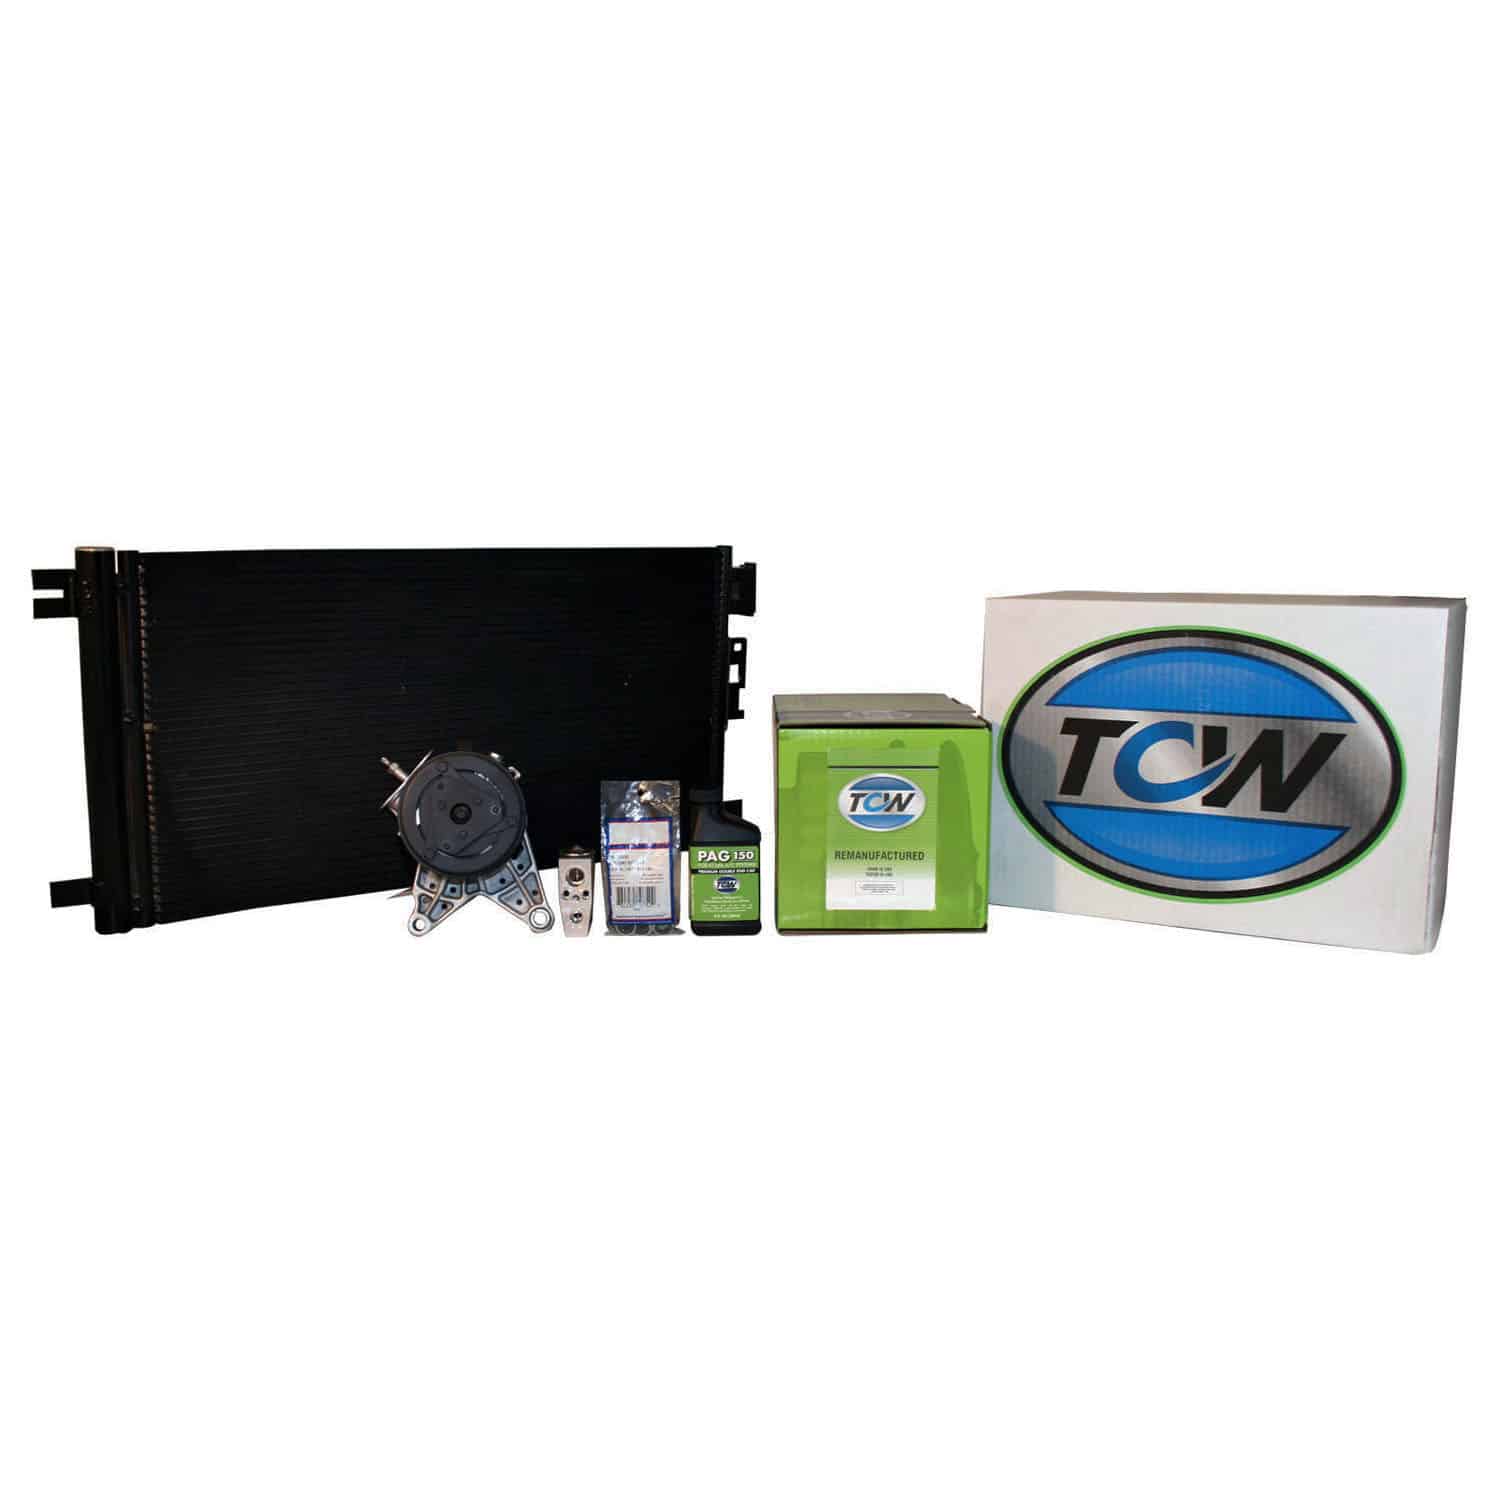 TCW Vehicle A/C Kit KC100053R Remanufactured Product Image field_60b6a13a6e67c